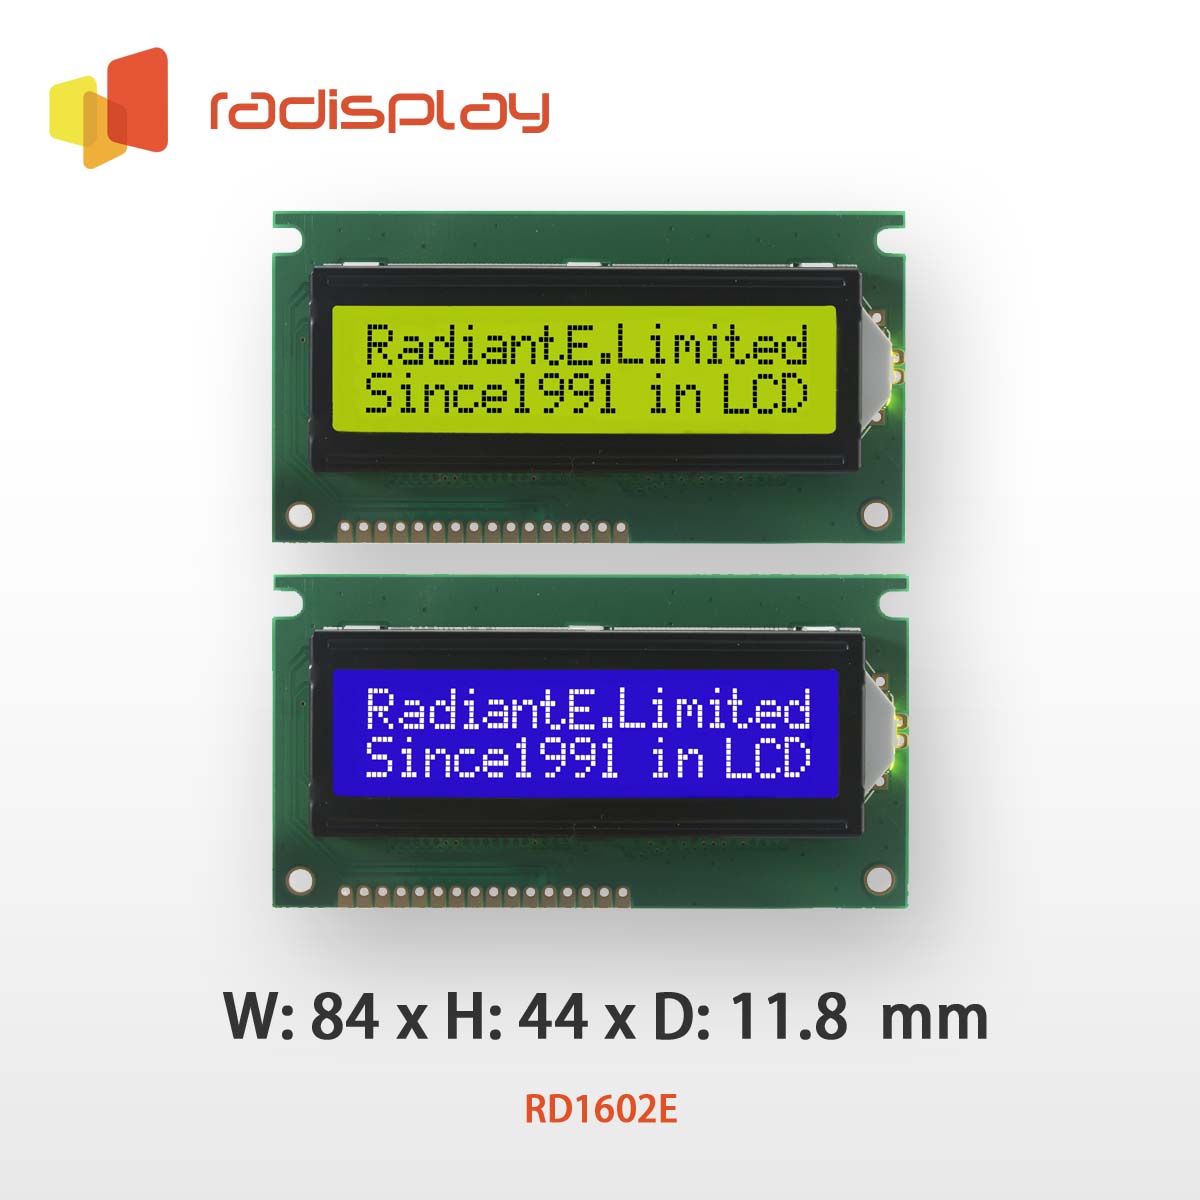 16x2 Character LCD Display Module, larger module size (RD1602E)